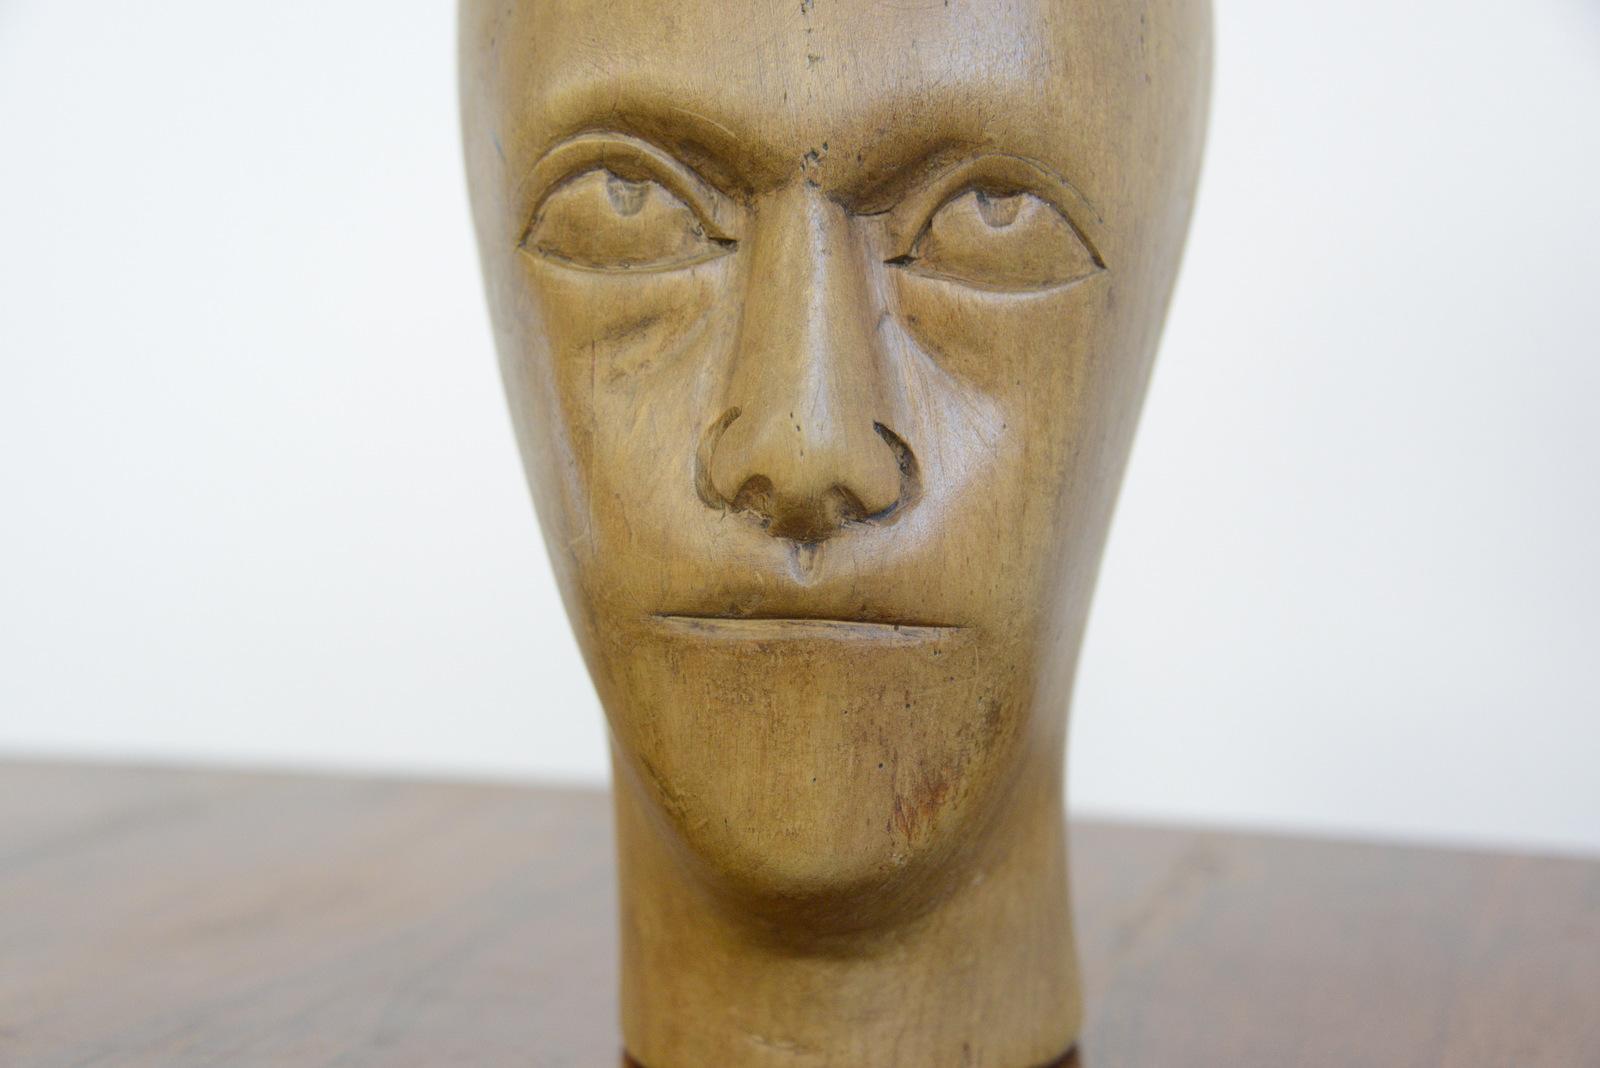 German carved wooden milliners head, circa 1910

- Hand carved from sycamore
- Used in the displaying and making of hats
- German, 1910
- Measures: 25 cm tall x 15 cm wide x 18 cm deep

Condition report

Signs of its previous in the form of